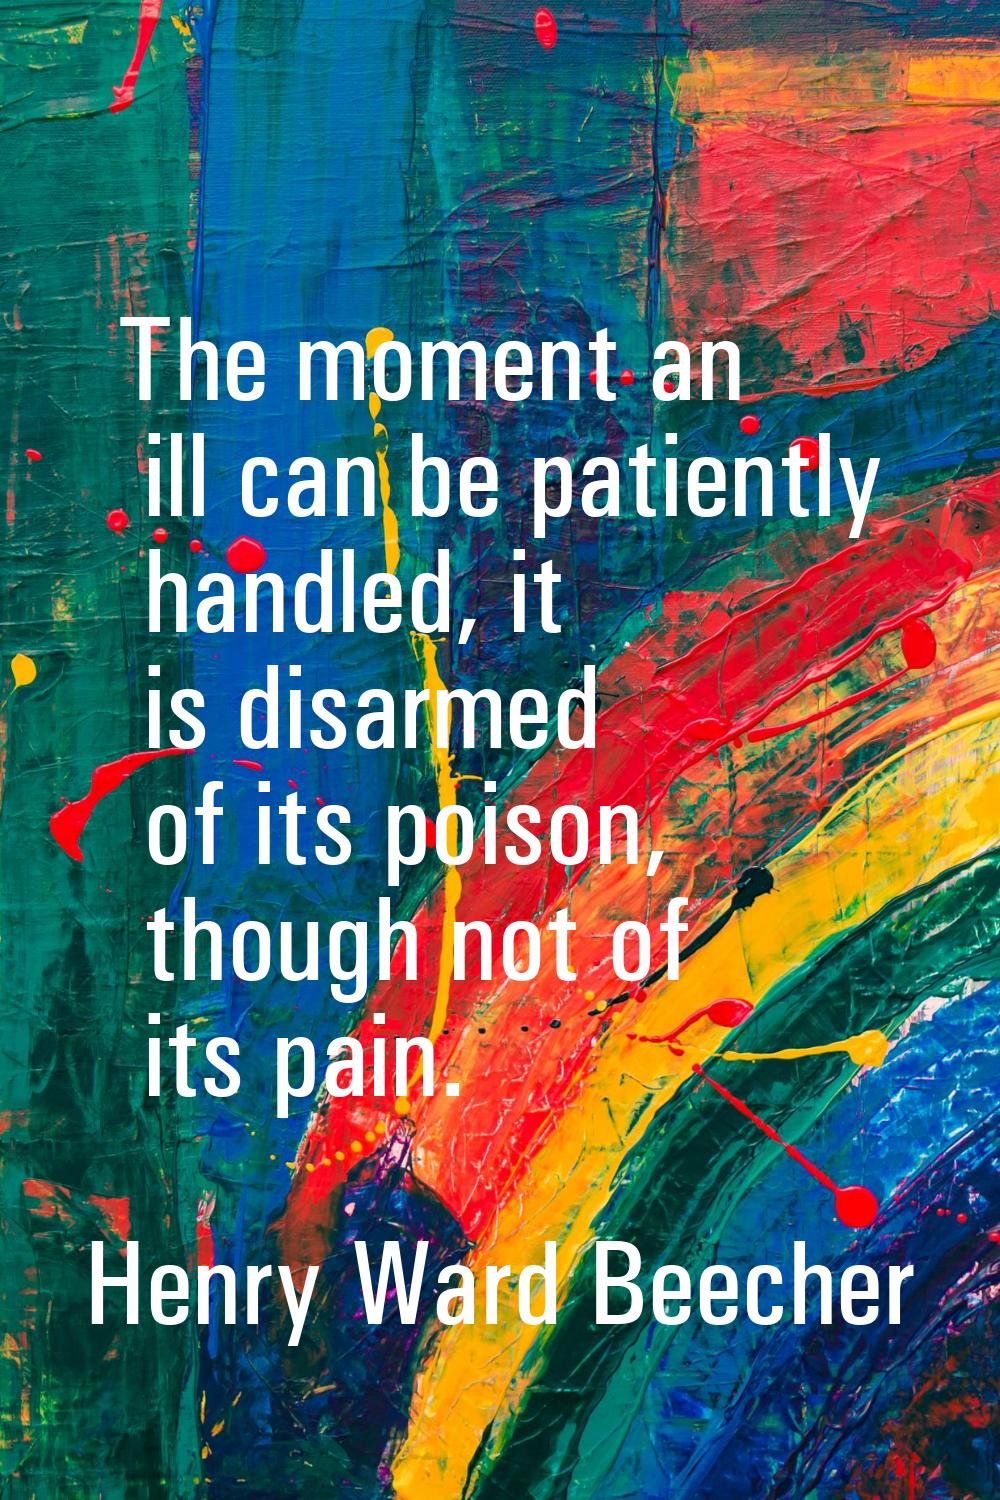 The moment an ill can be patiently handled, it is disarmed of its poison, though not of its pain.